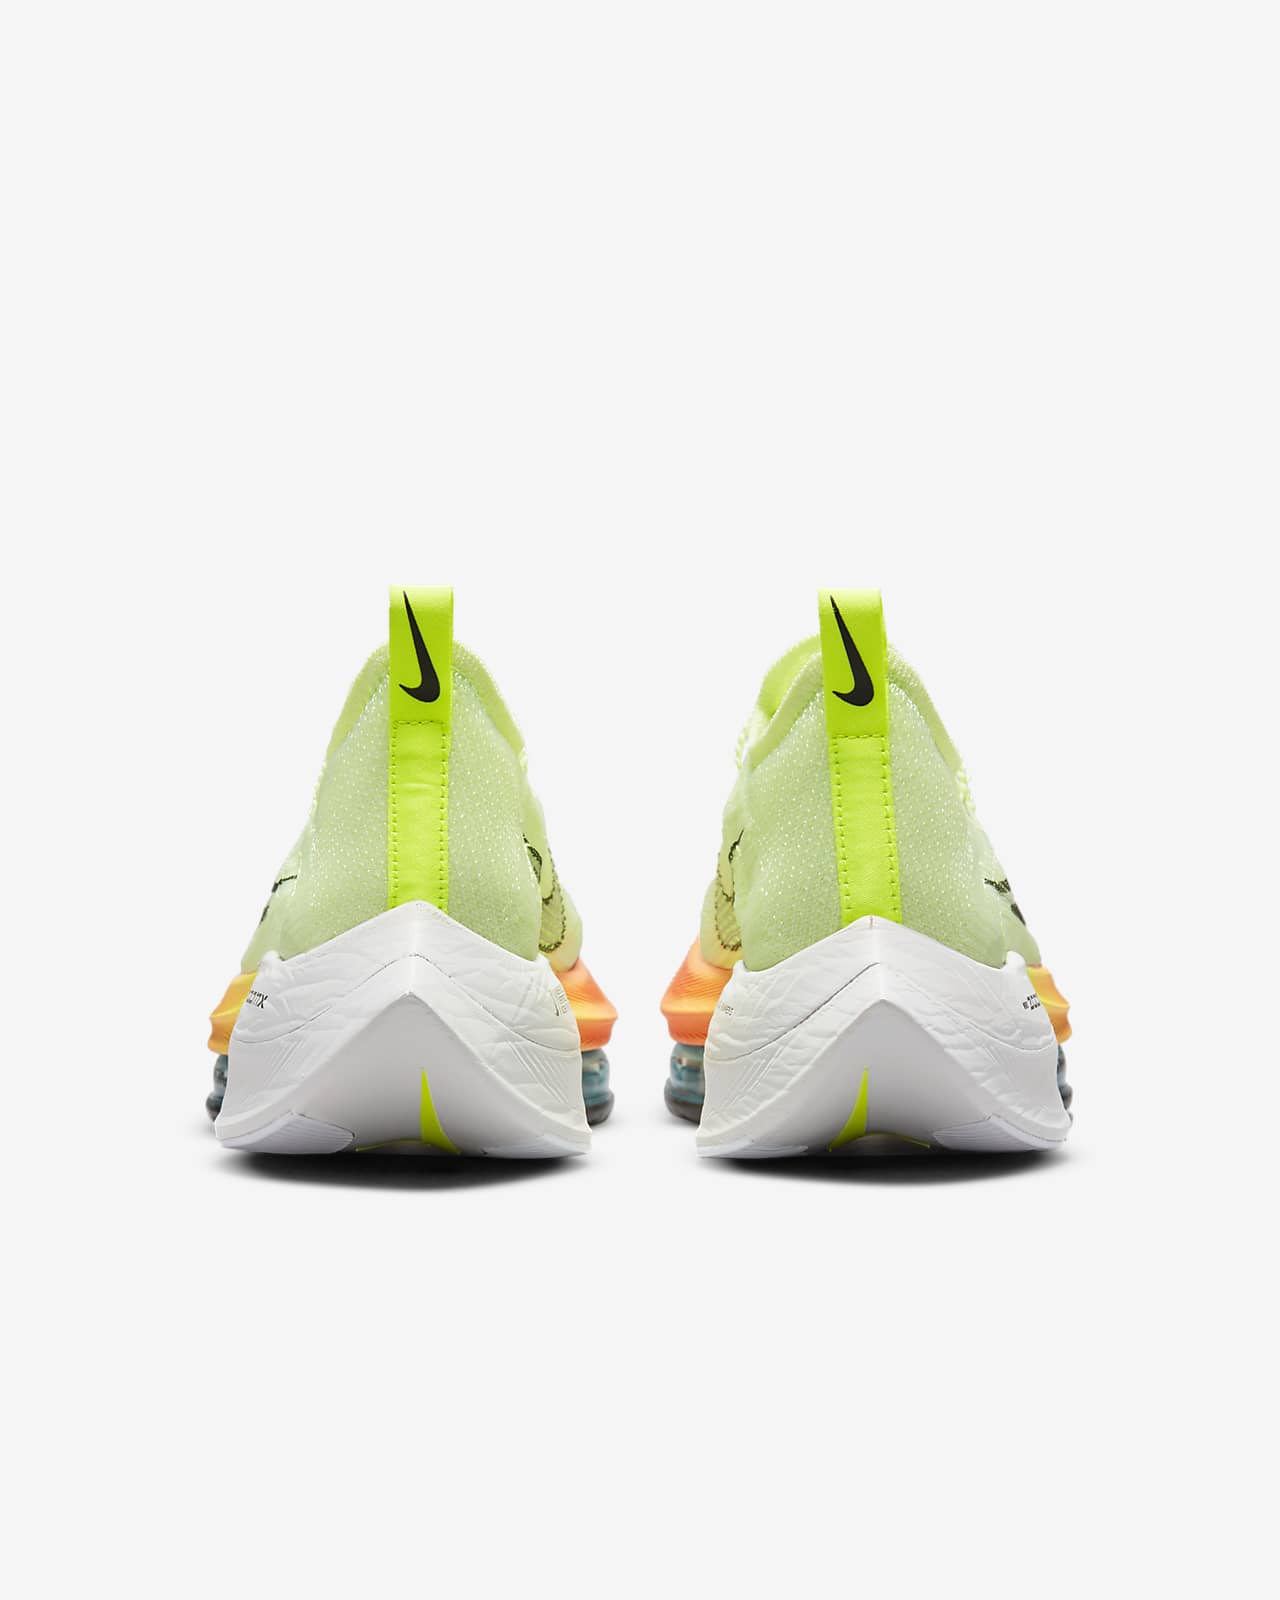 Nike Air Zoom Alphafly NEXT% Flyknit Women's Road Racing Shoes